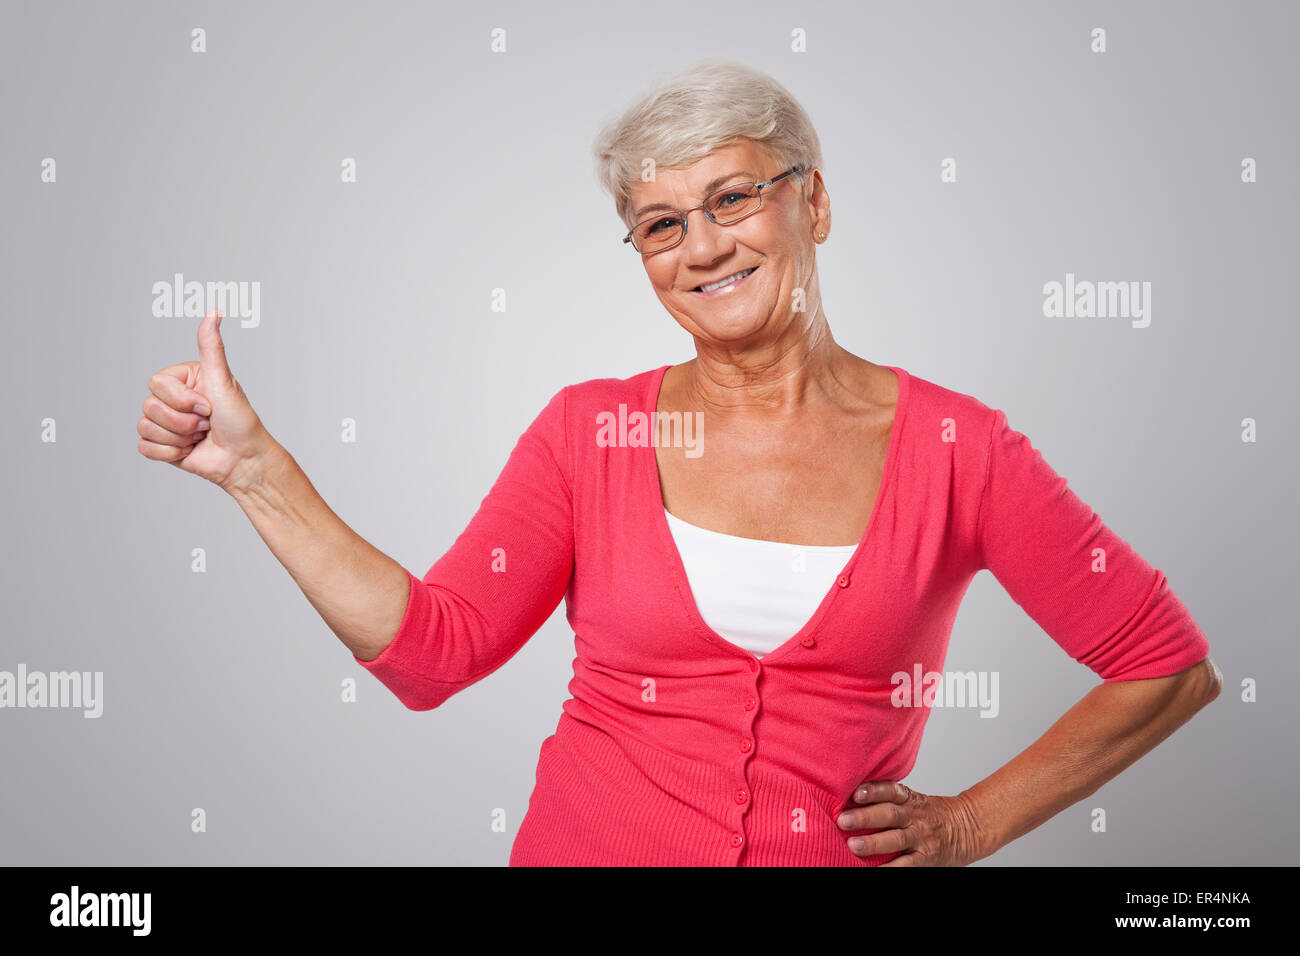 Thumbs up from older lady Stock Photo